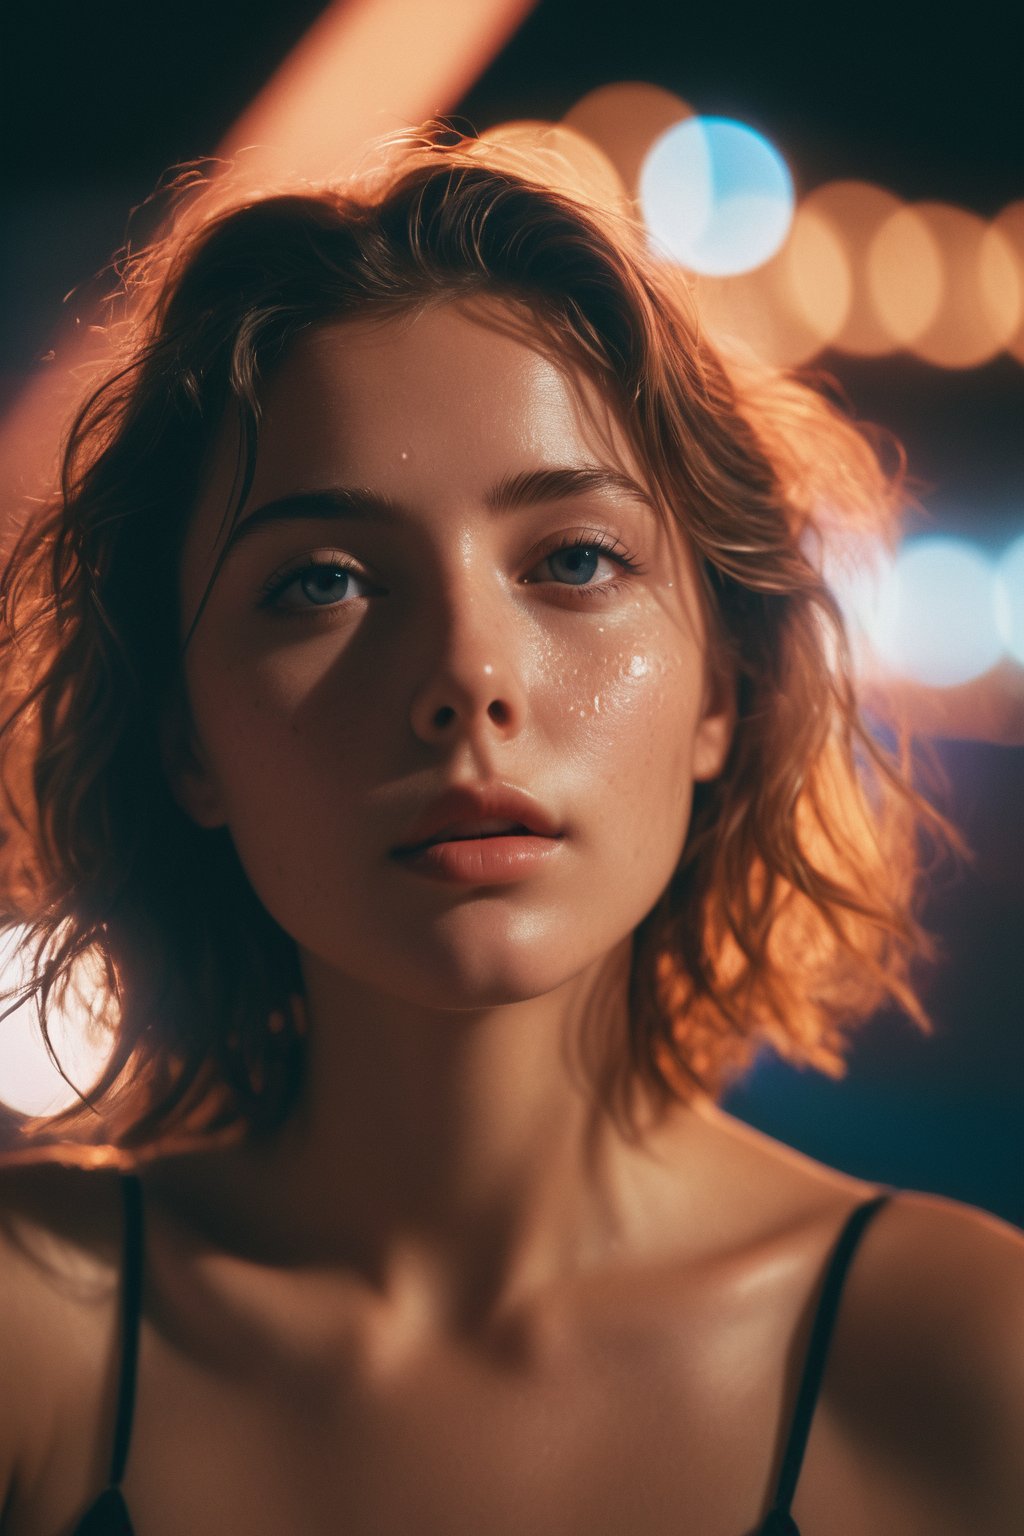 (ultra realistic,best quality),photorealistic,Extremely Realistic,in depth,cinematic light,hubggirl,moment eyes,beautiful face,sexy girl,upper body,splash detailed,surreal dramatic lighting shadow (lofi, analog),kodak film by Brandon Woelfel Ryan McGinley,dynamic poses,particle effects,perfect hands,perfect lighting,vibrant colors,intricate details,high detailed skin,intricate background,realism,realistic,raw,analog,taken by Canon EOS,SIGMA Art Lens 35mm F1.4,ISO 200 Shutter Speed 2000,Vivid picture,